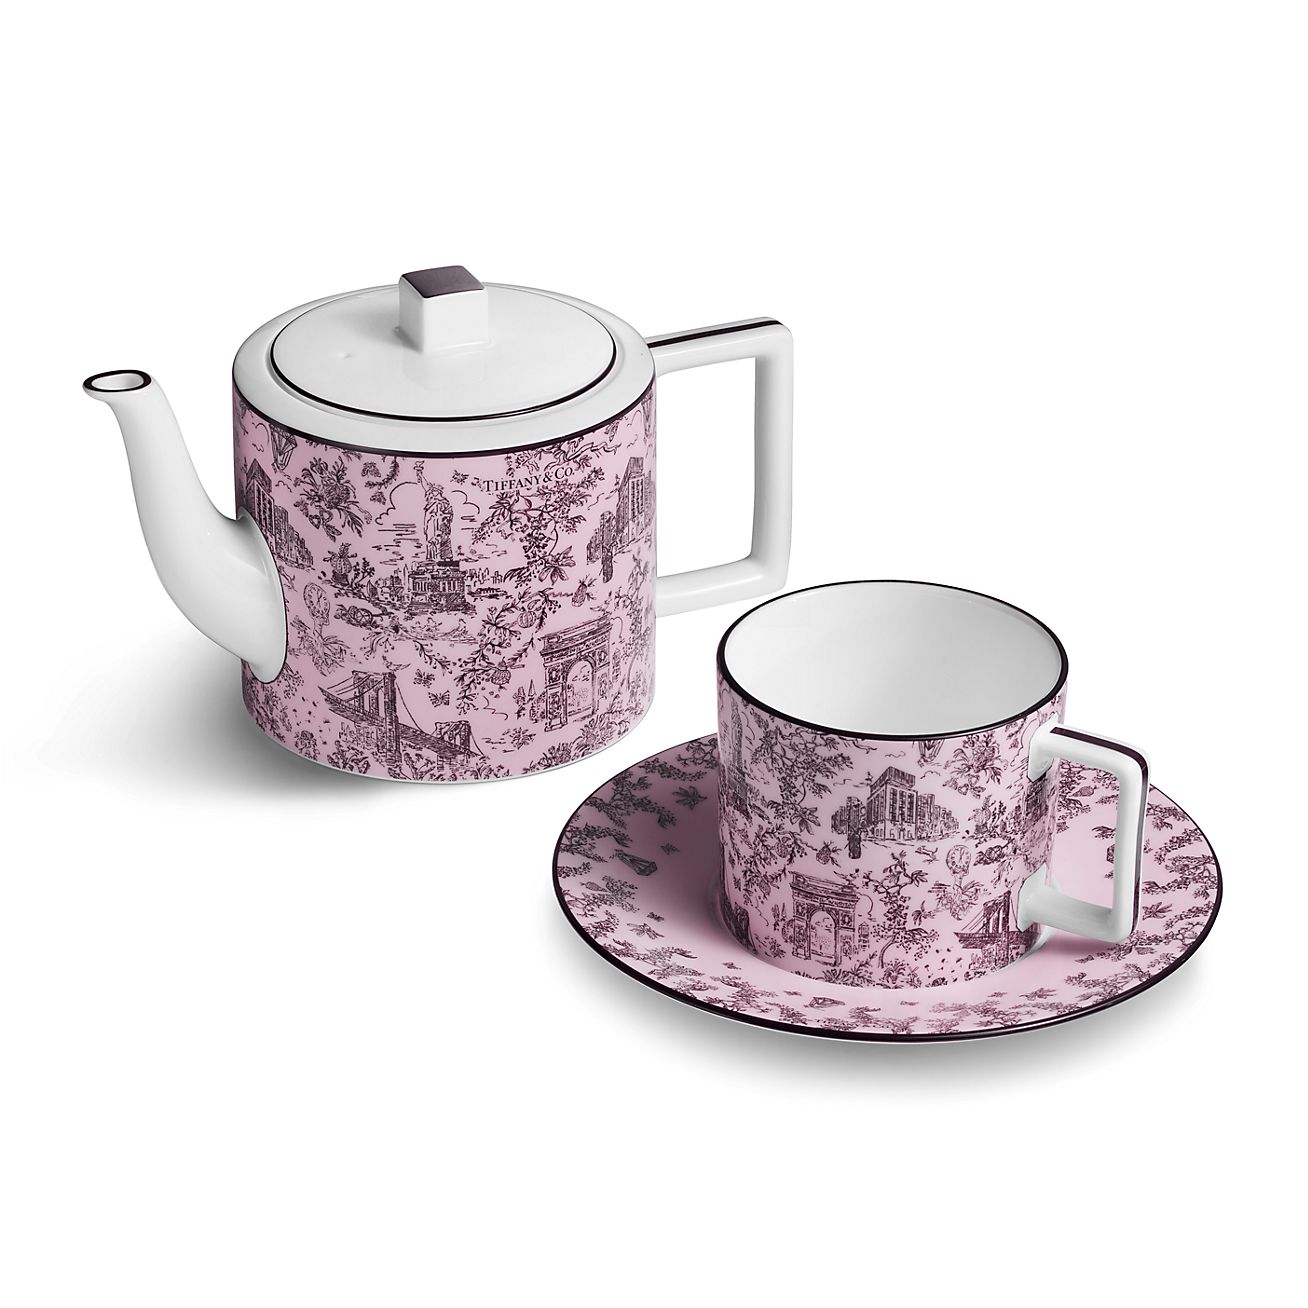 Tiffany Toile Cup and Saucer